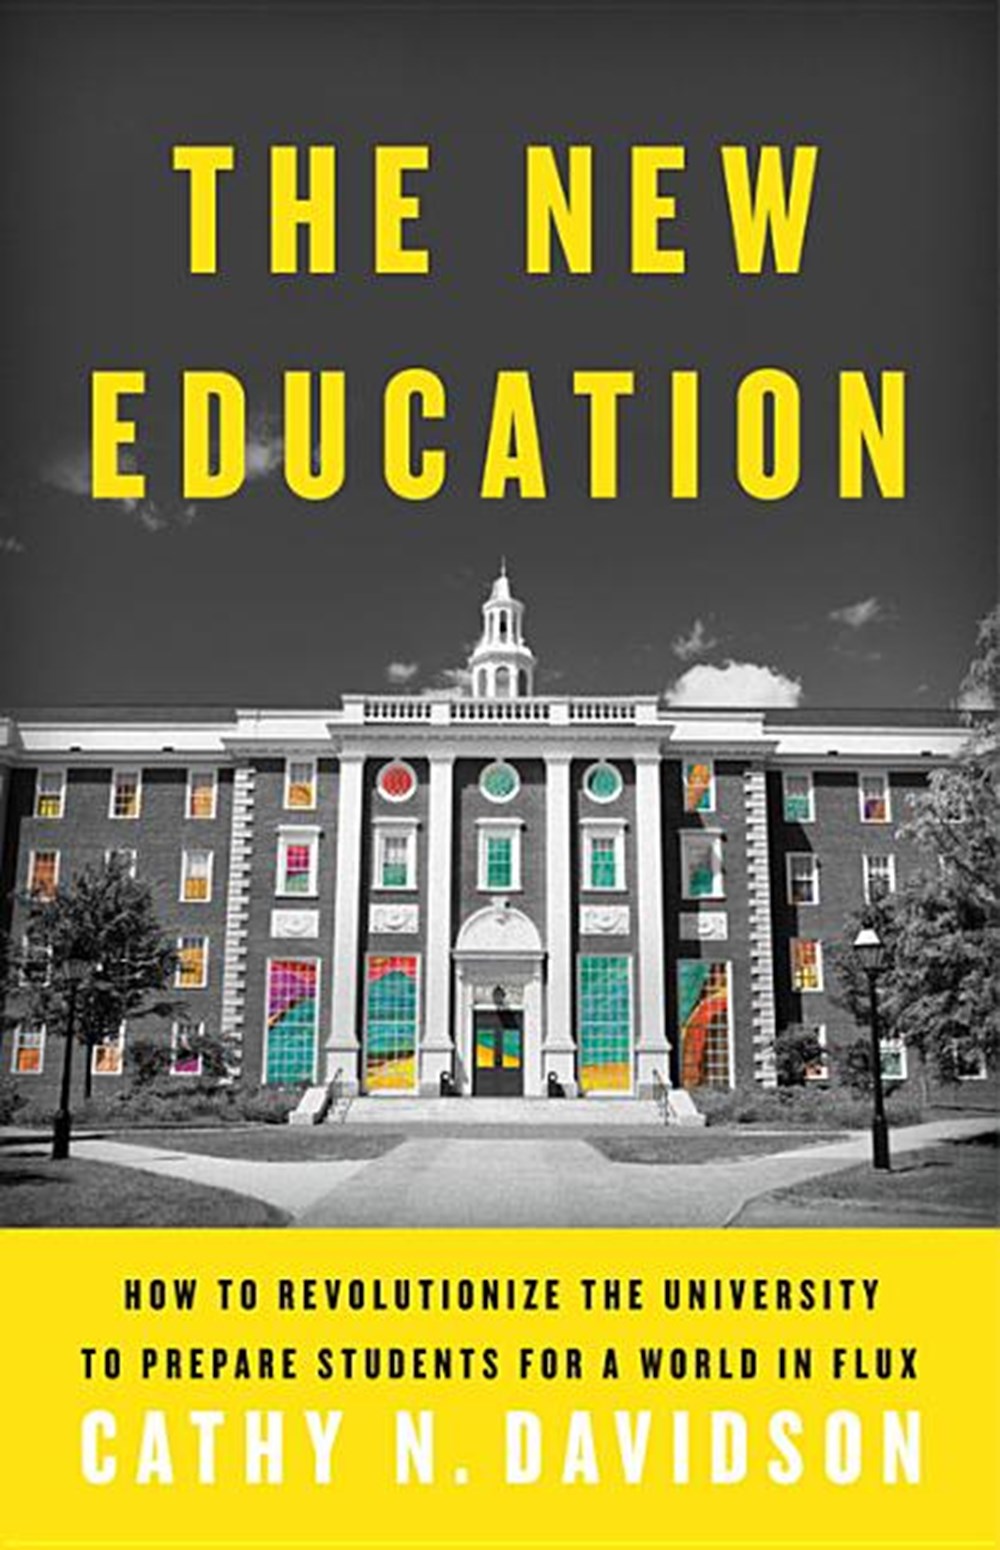 New Education: How to Revolutionize the University to Prepare Students for a World in Flux